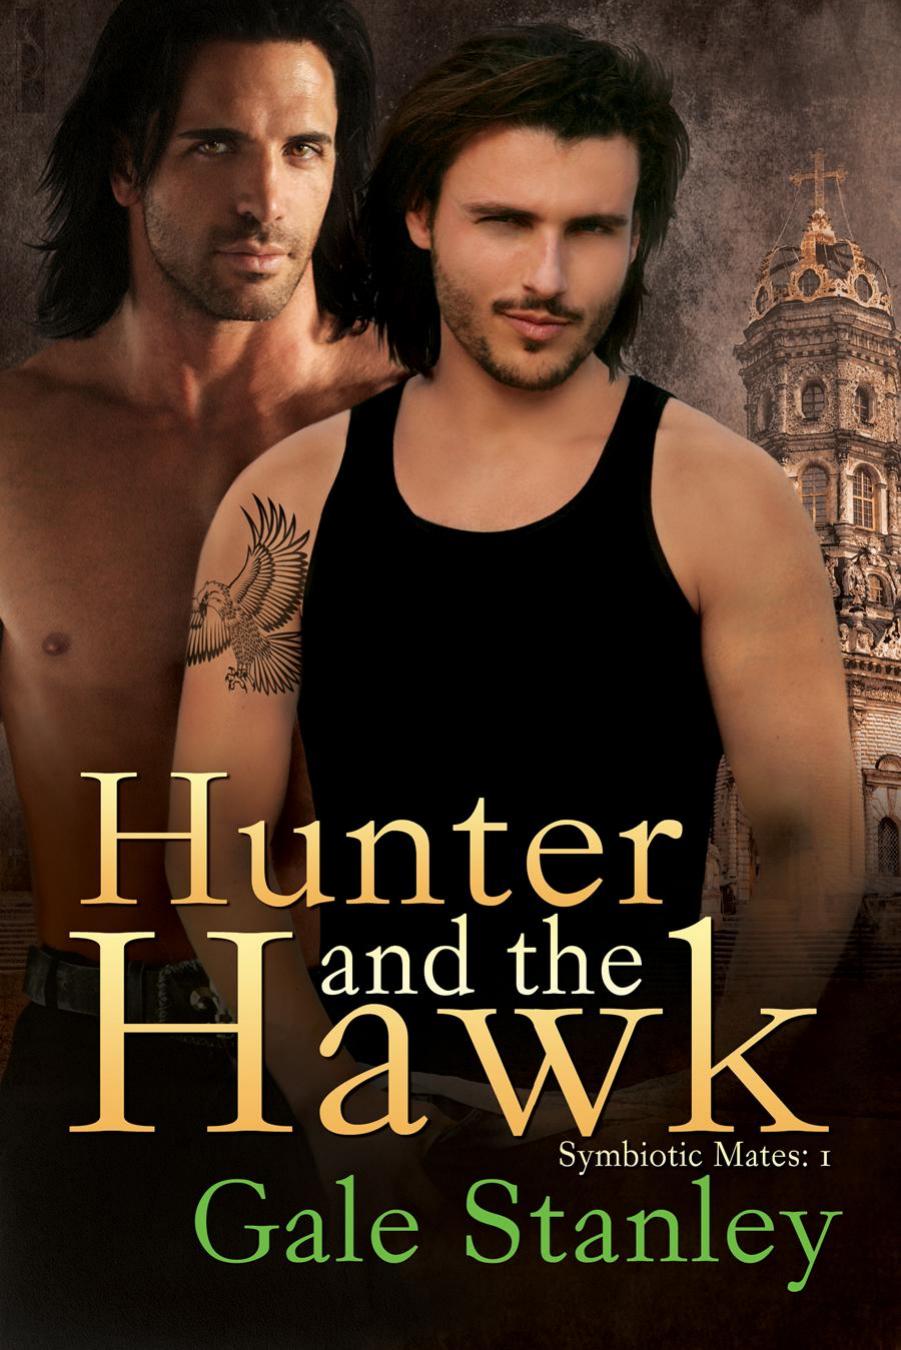 Symbiotic Mates 1: Hunter and the Hawk by Gale Stanley